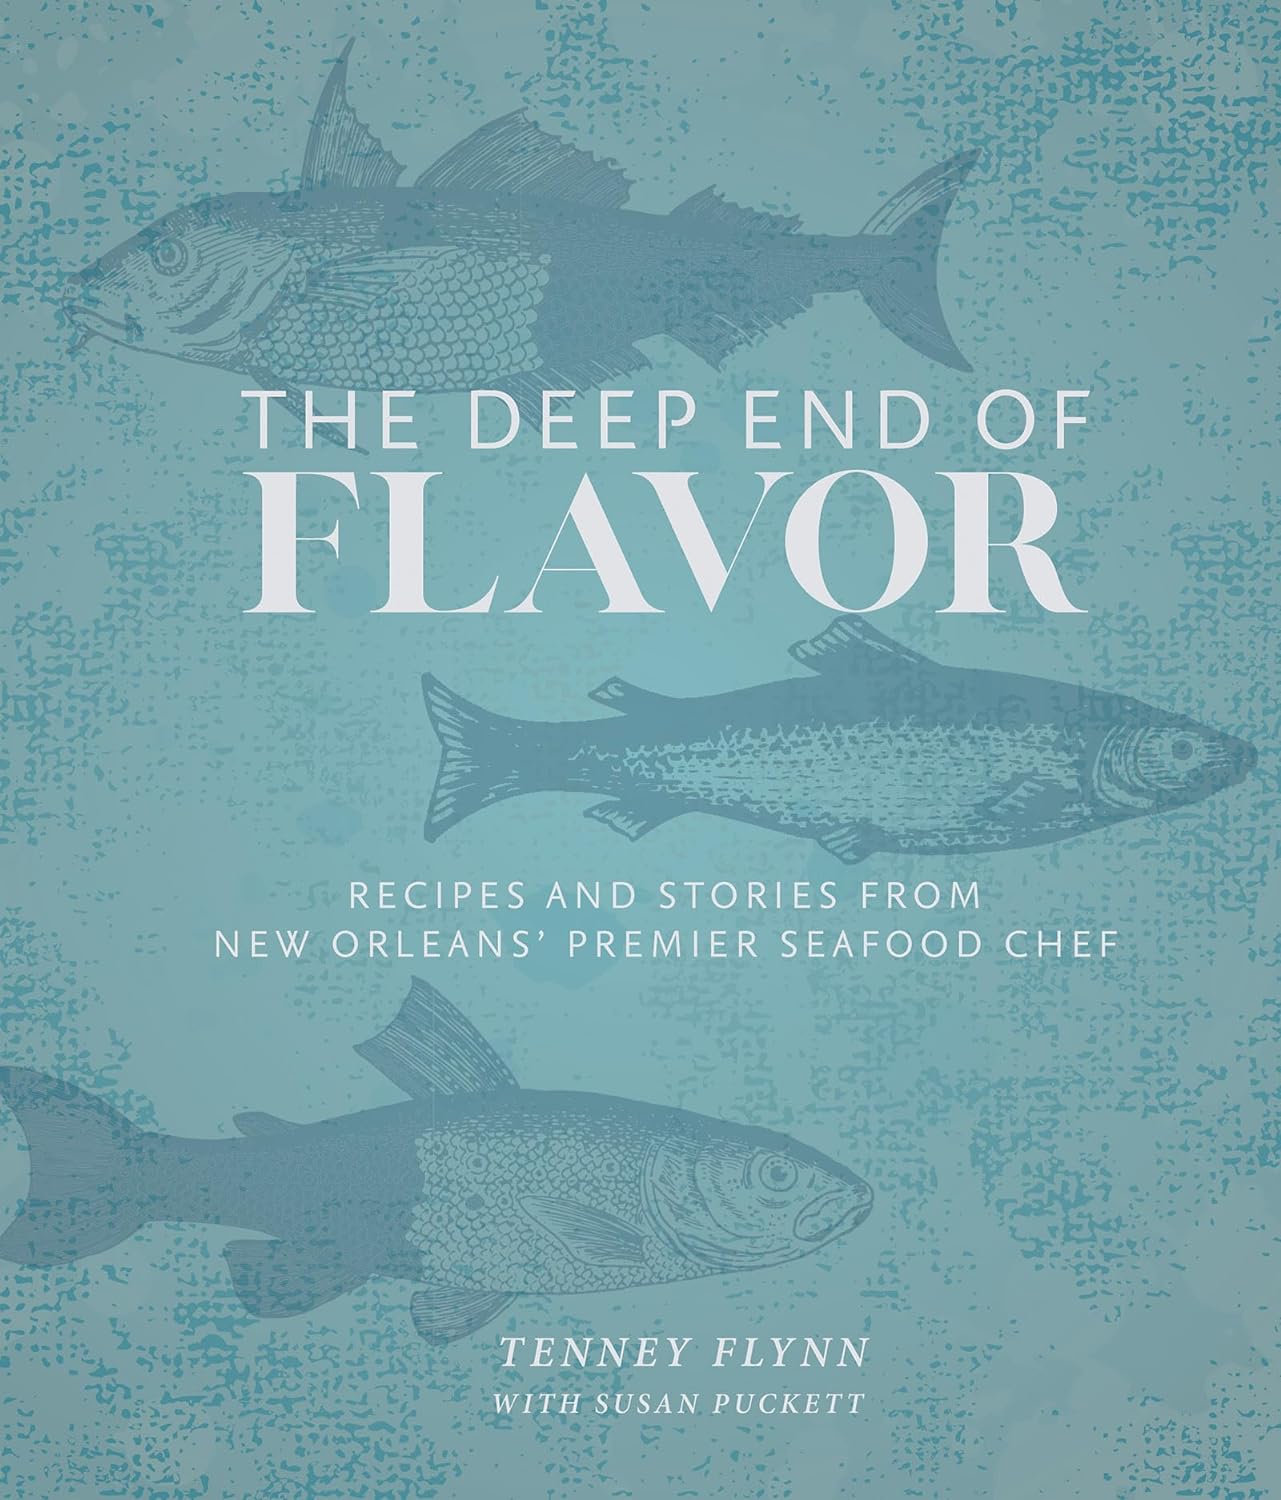 The Deep End of Flavor: Recipes and Stories from New Orleans' Premier Seafood Chef (Tenney Flynn and Susan Puckett)